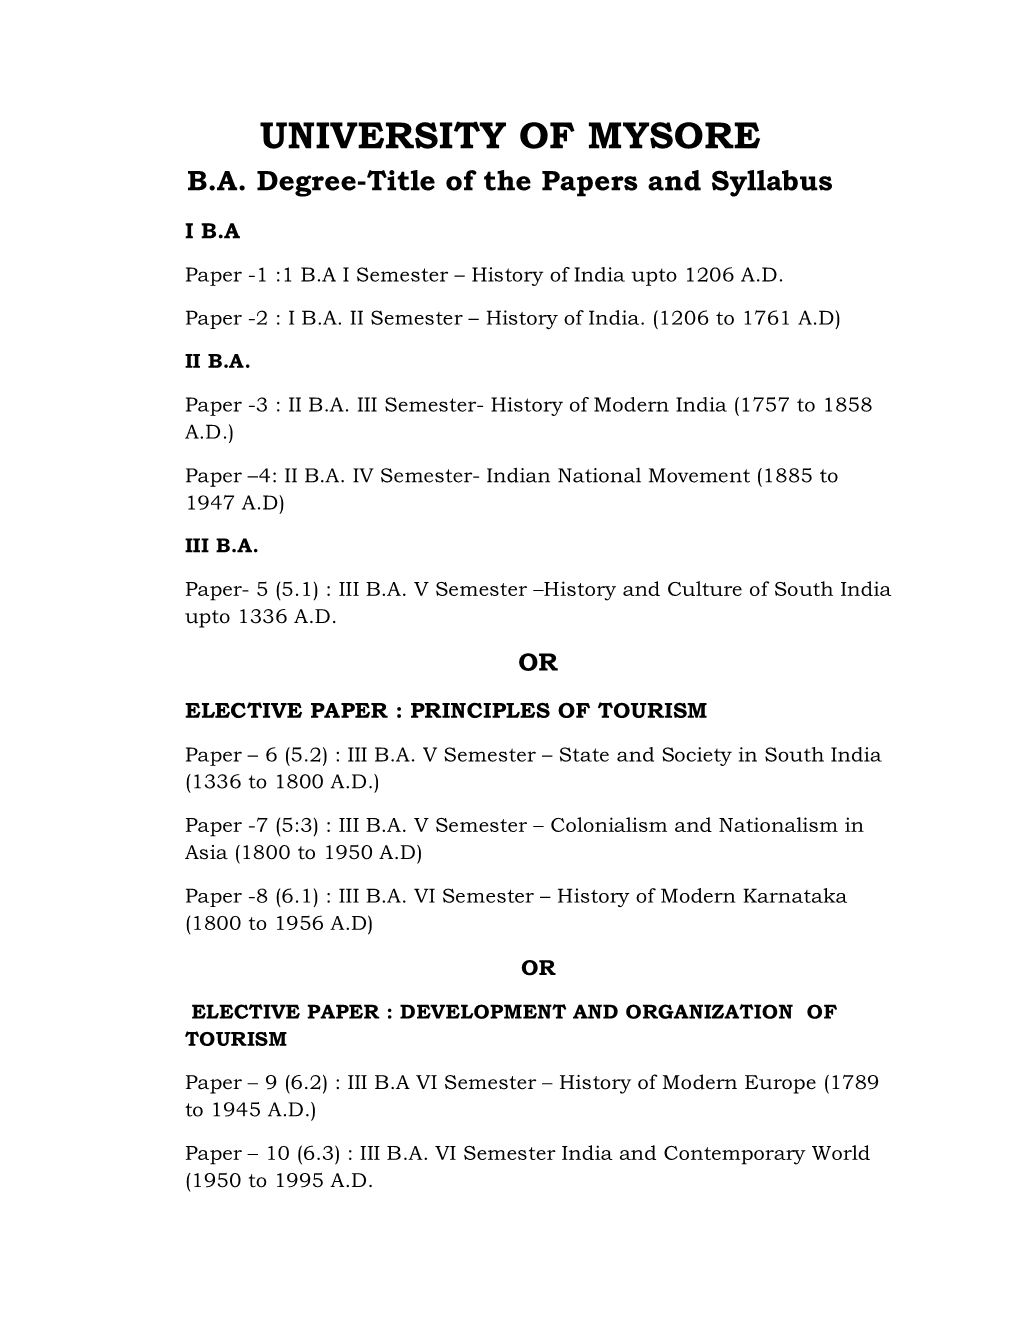 BA Degree-Title of the Papers and Syllabus